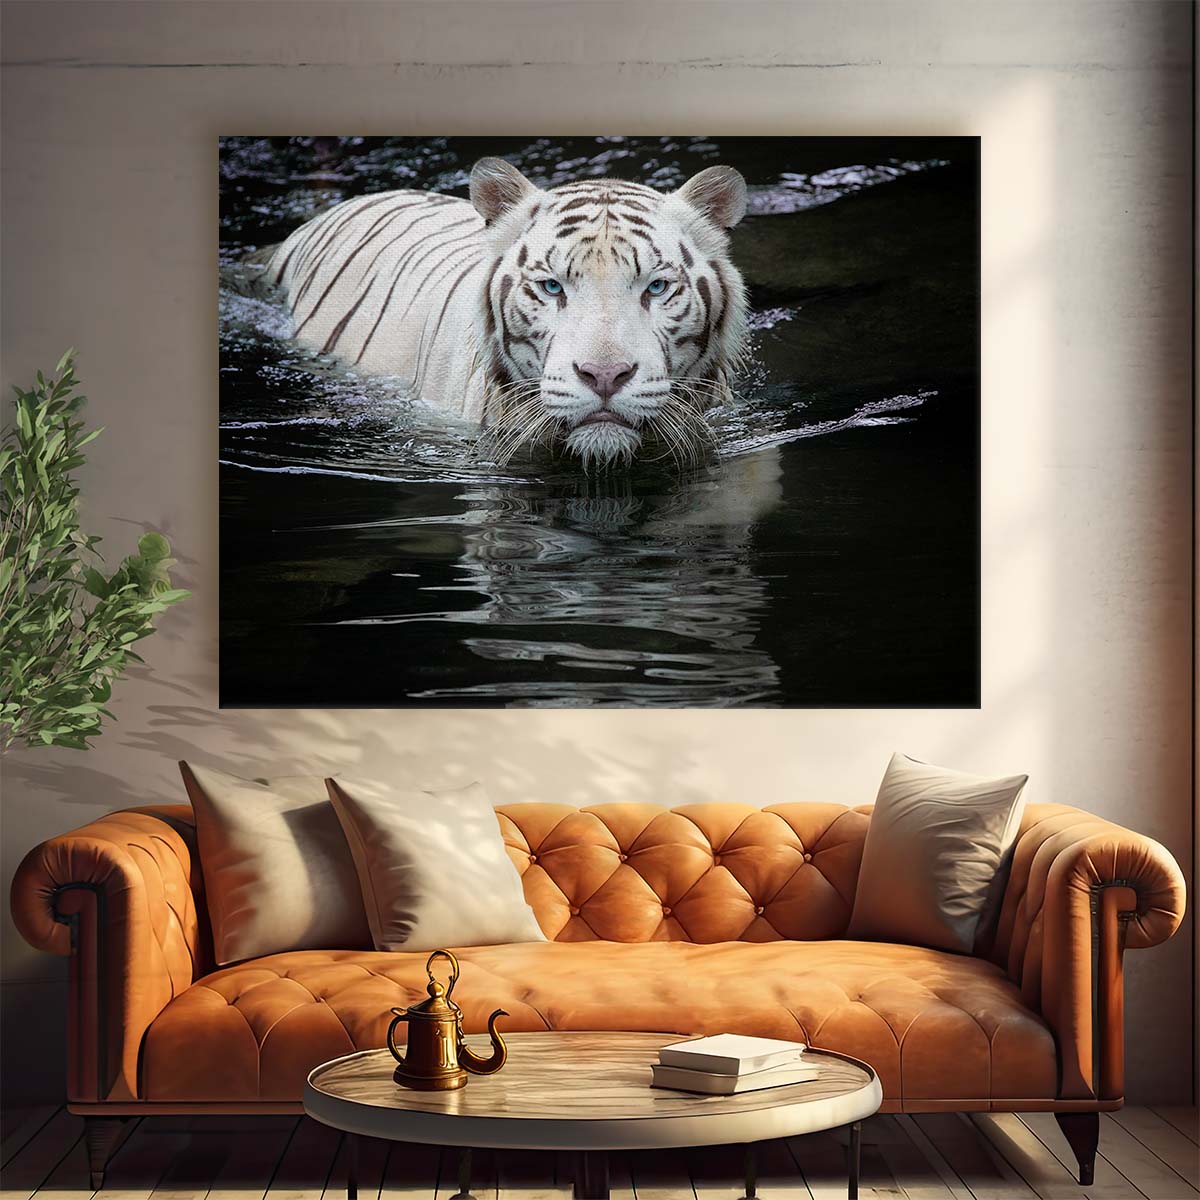 Intense Gaze White Tiger Bathing Wall Art by Luxuriance Designs. Made in USA.